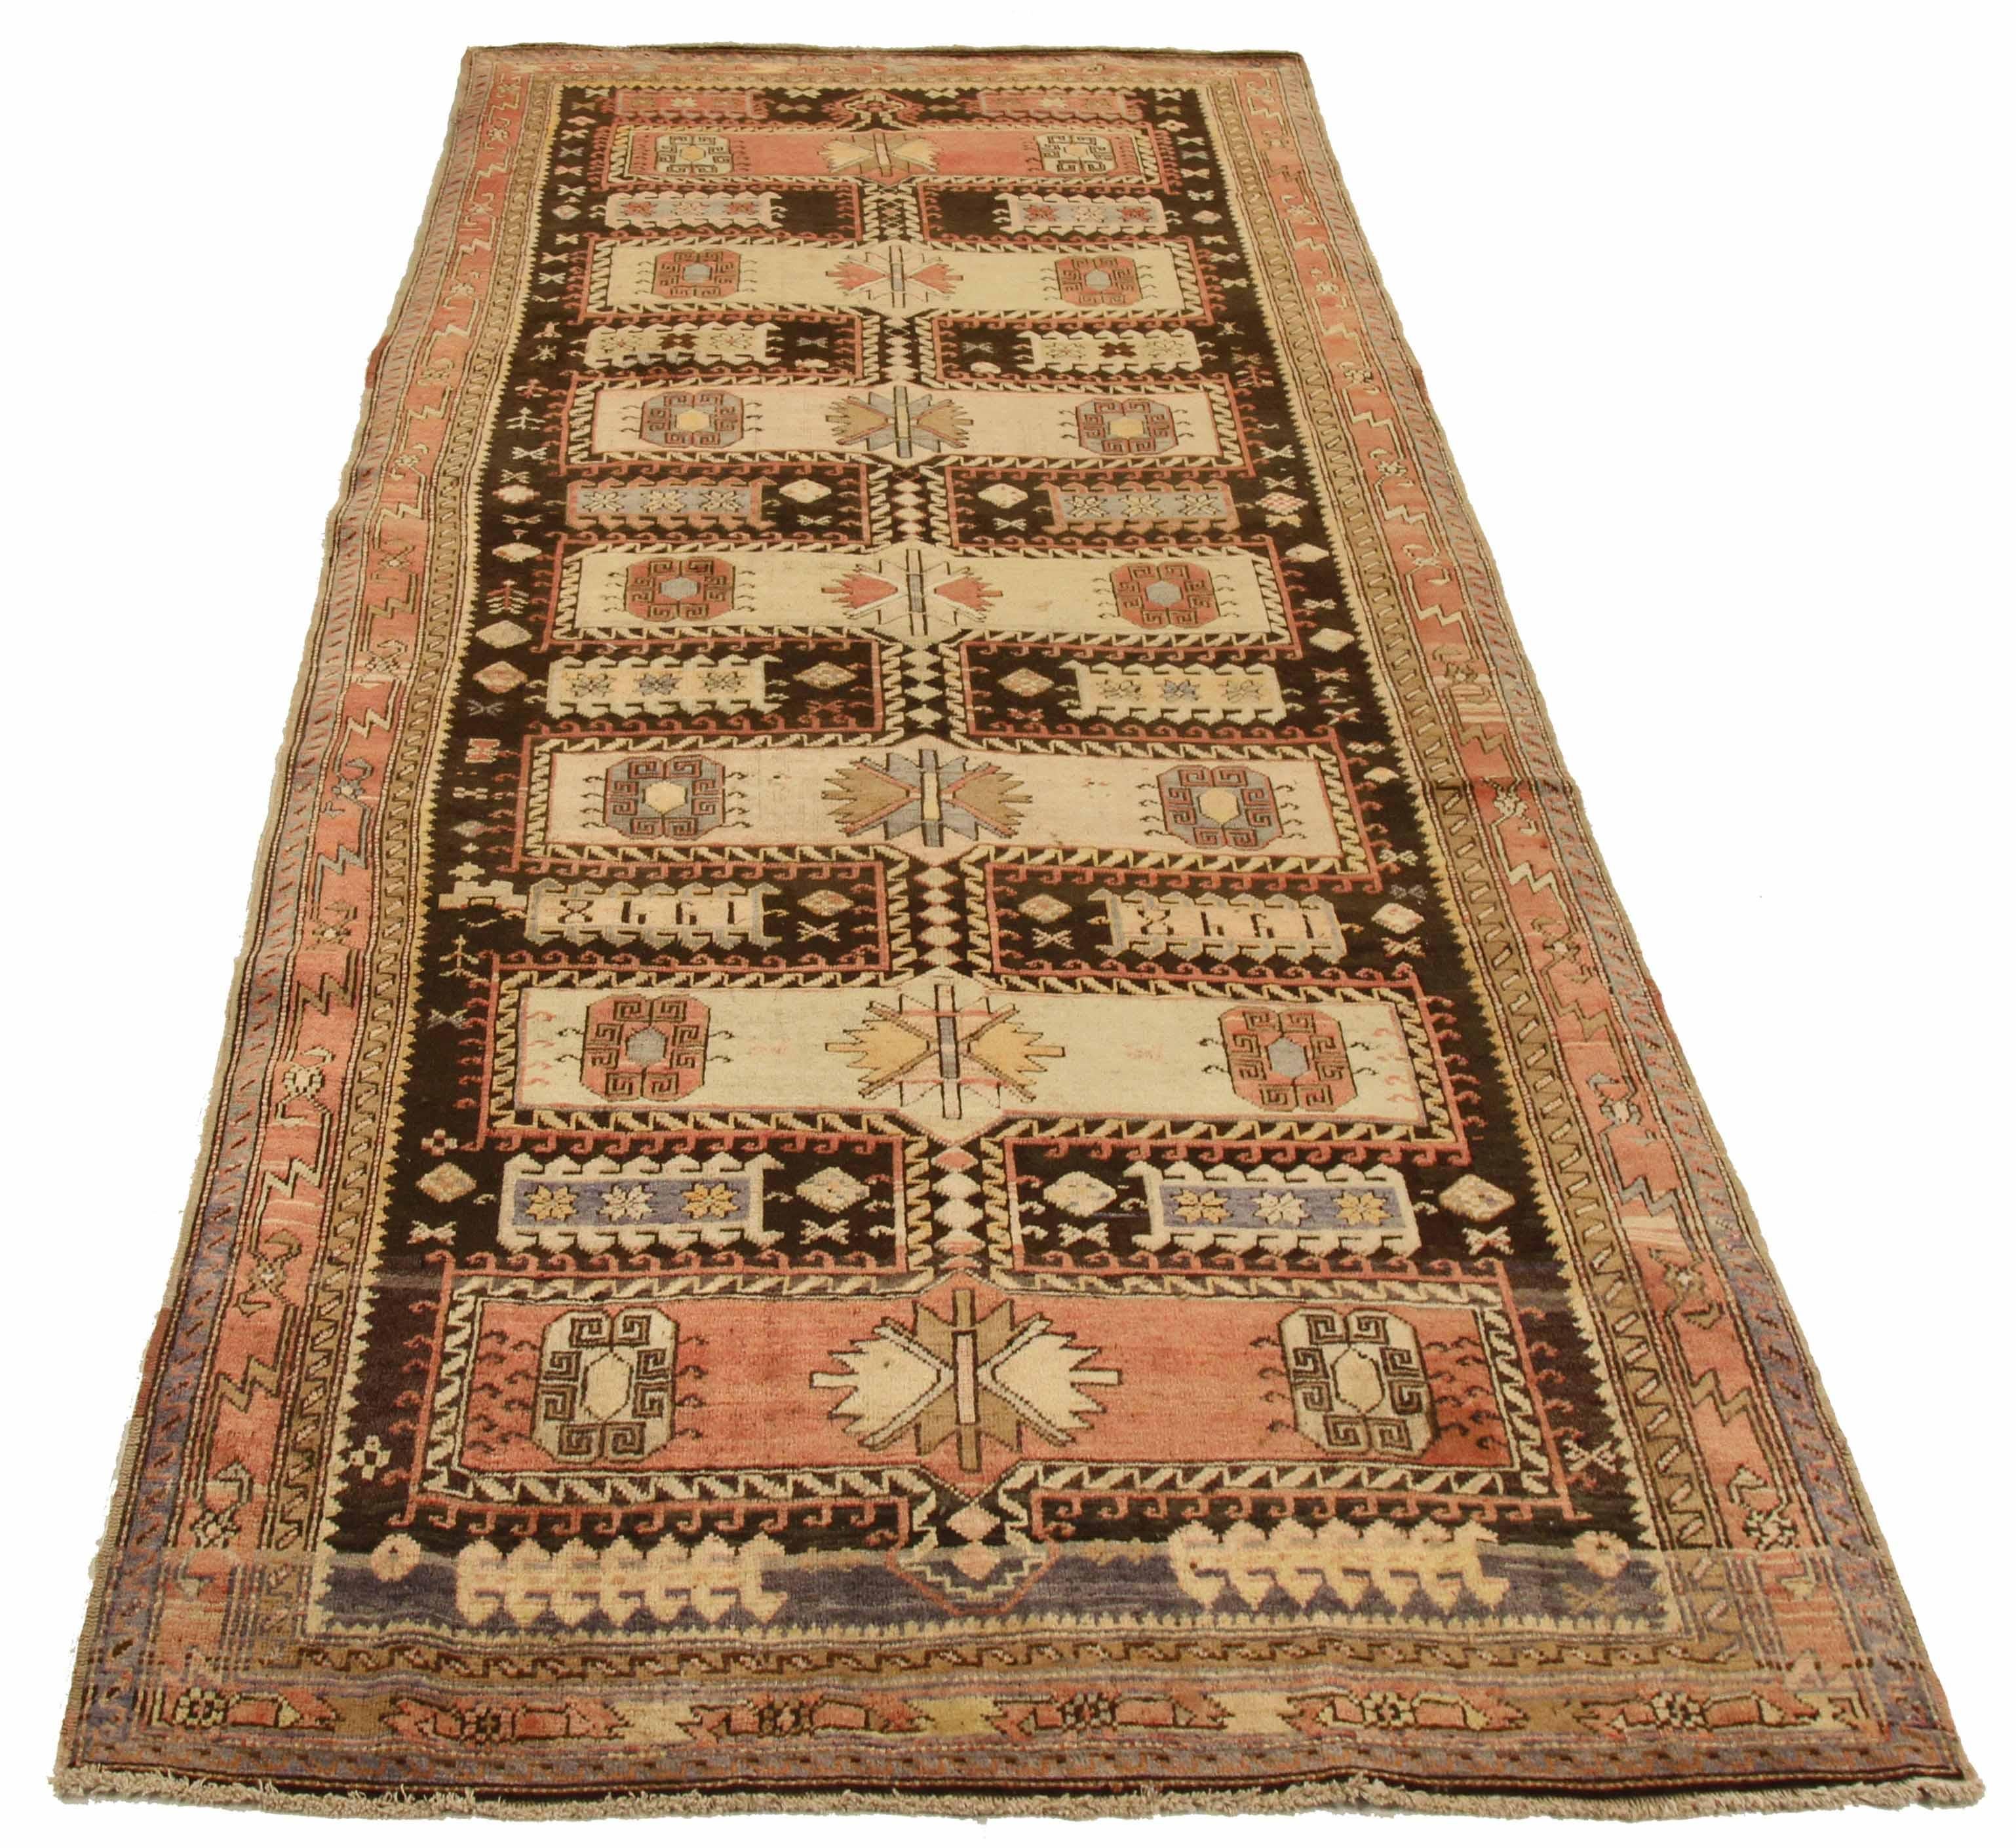 Antique Russia area rug handwoven from the finest sheep’s wool. It’s colored with all-natural vegetable dyes that are safe for humans and pets. It’s a traditional Karabagh design handwoven by expert artisans.It’s a lovely area rug that can be